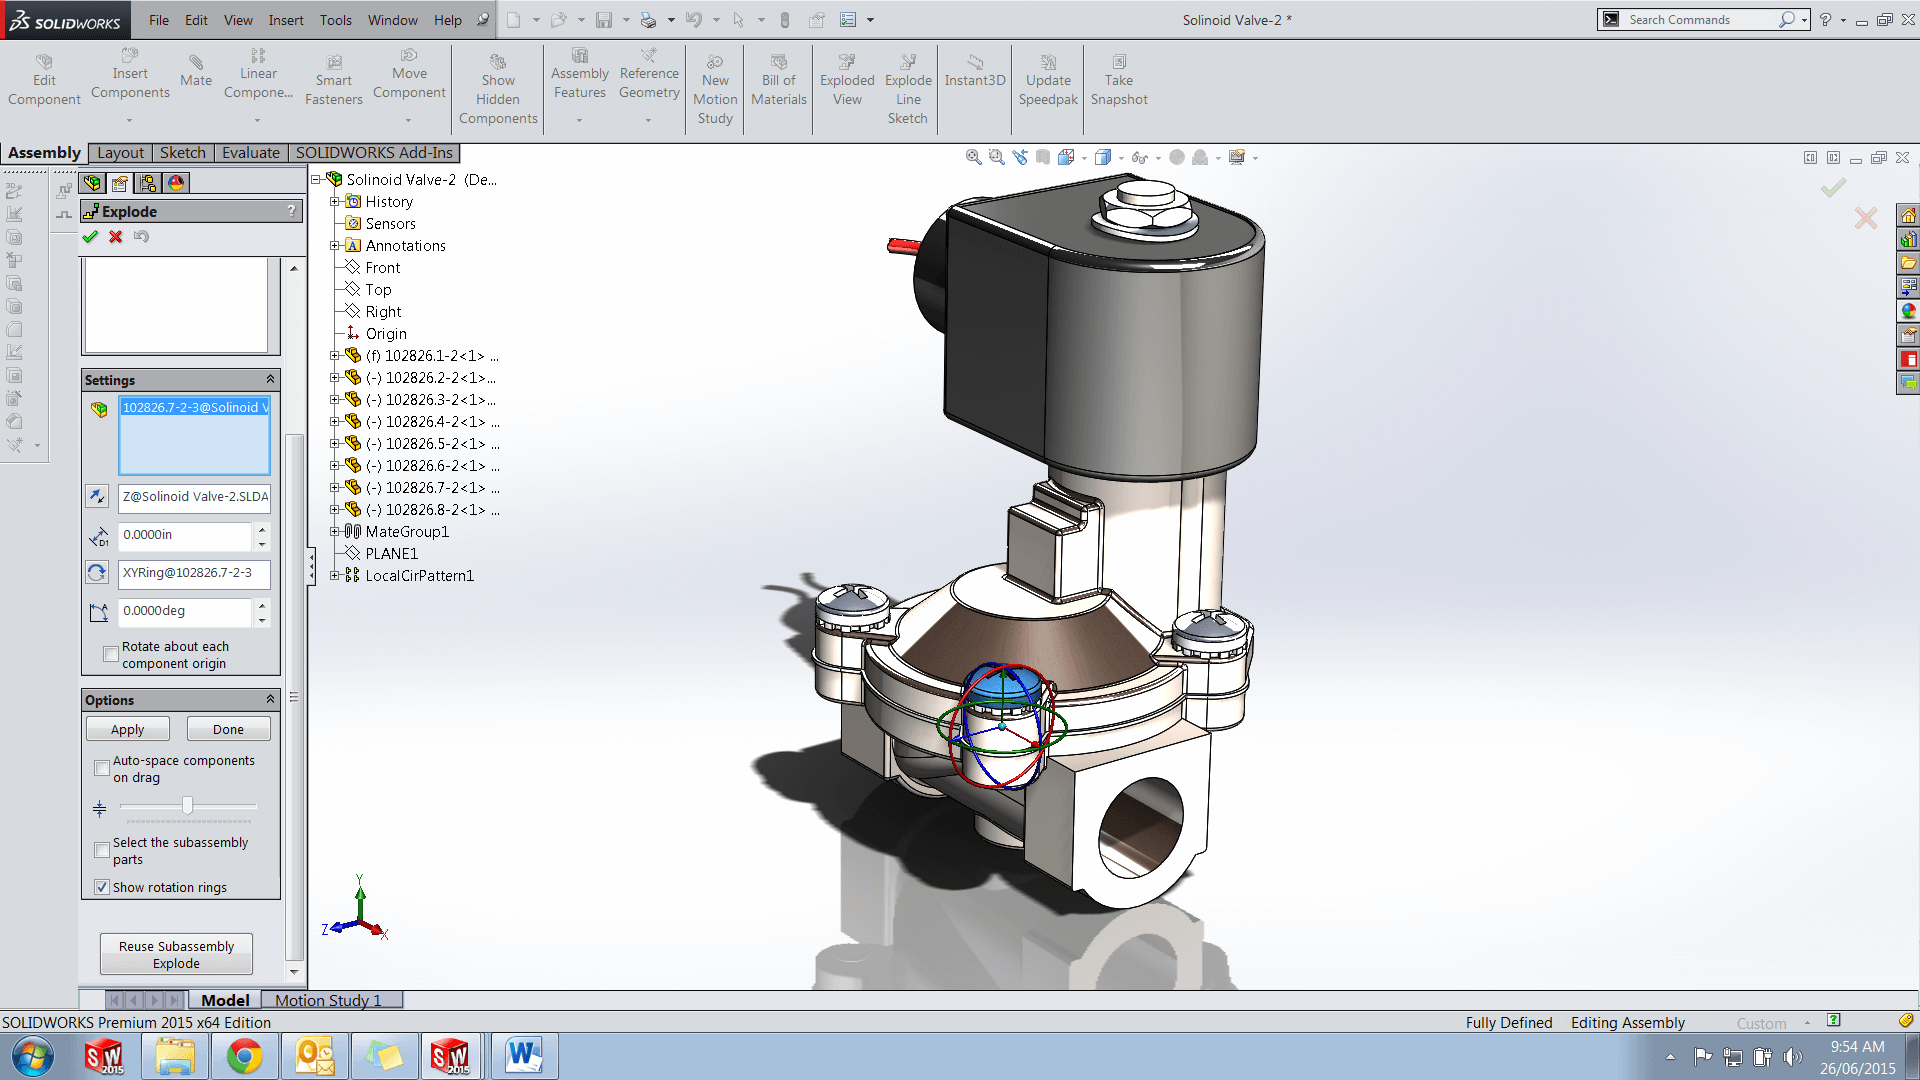 How do i animate a screw being unwound in solidworks?